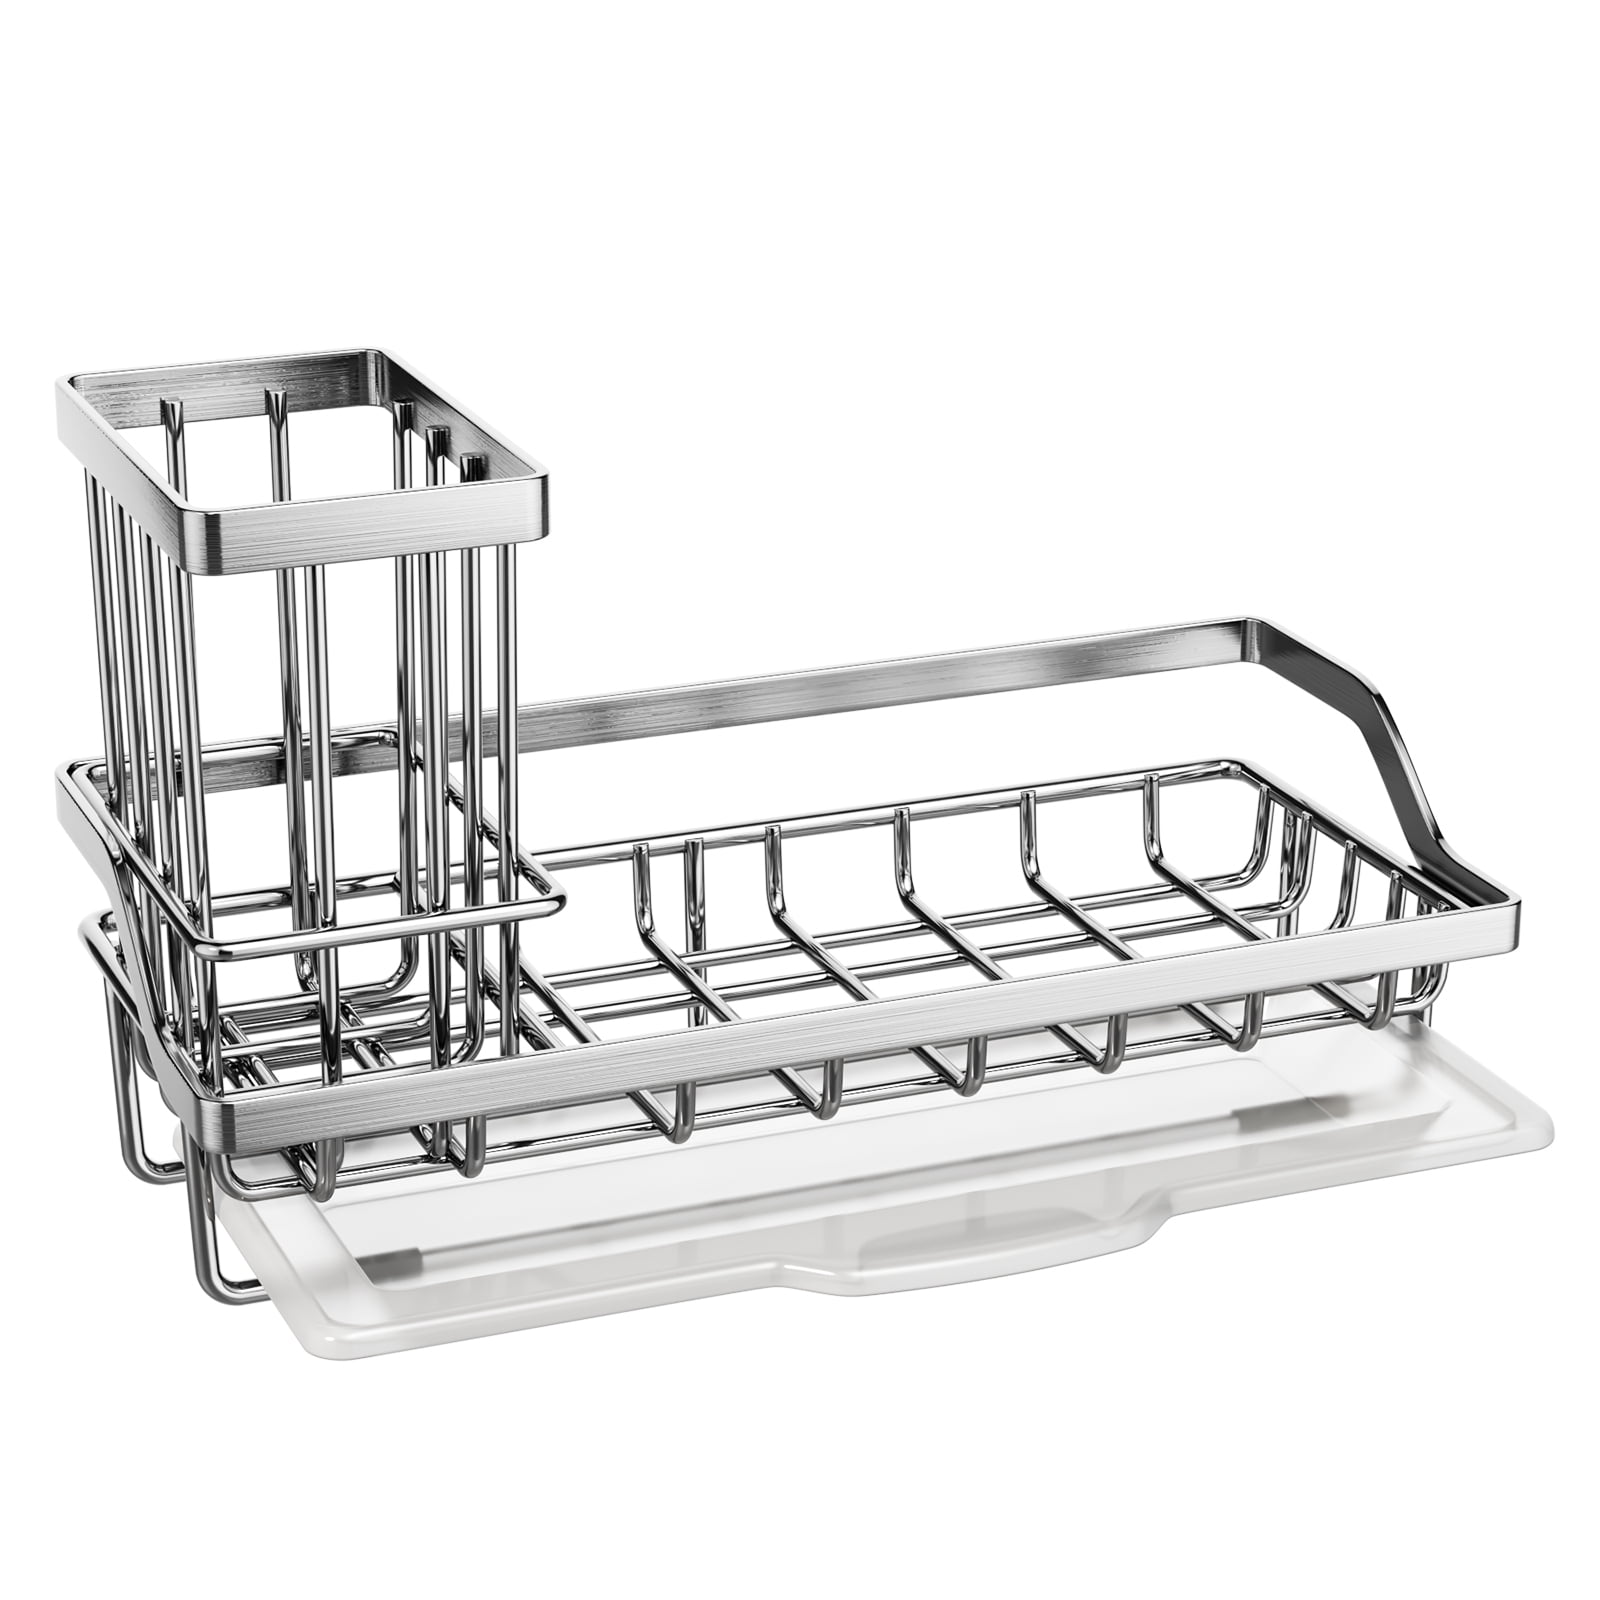 Wetheny Kitchen Sponge Holder-Kitchen Sink Caddy Organizer with Drain Pan  304 Stainless Steel for Sponges, Cleaning Cloth, Scrub Brush, Dish Soap and